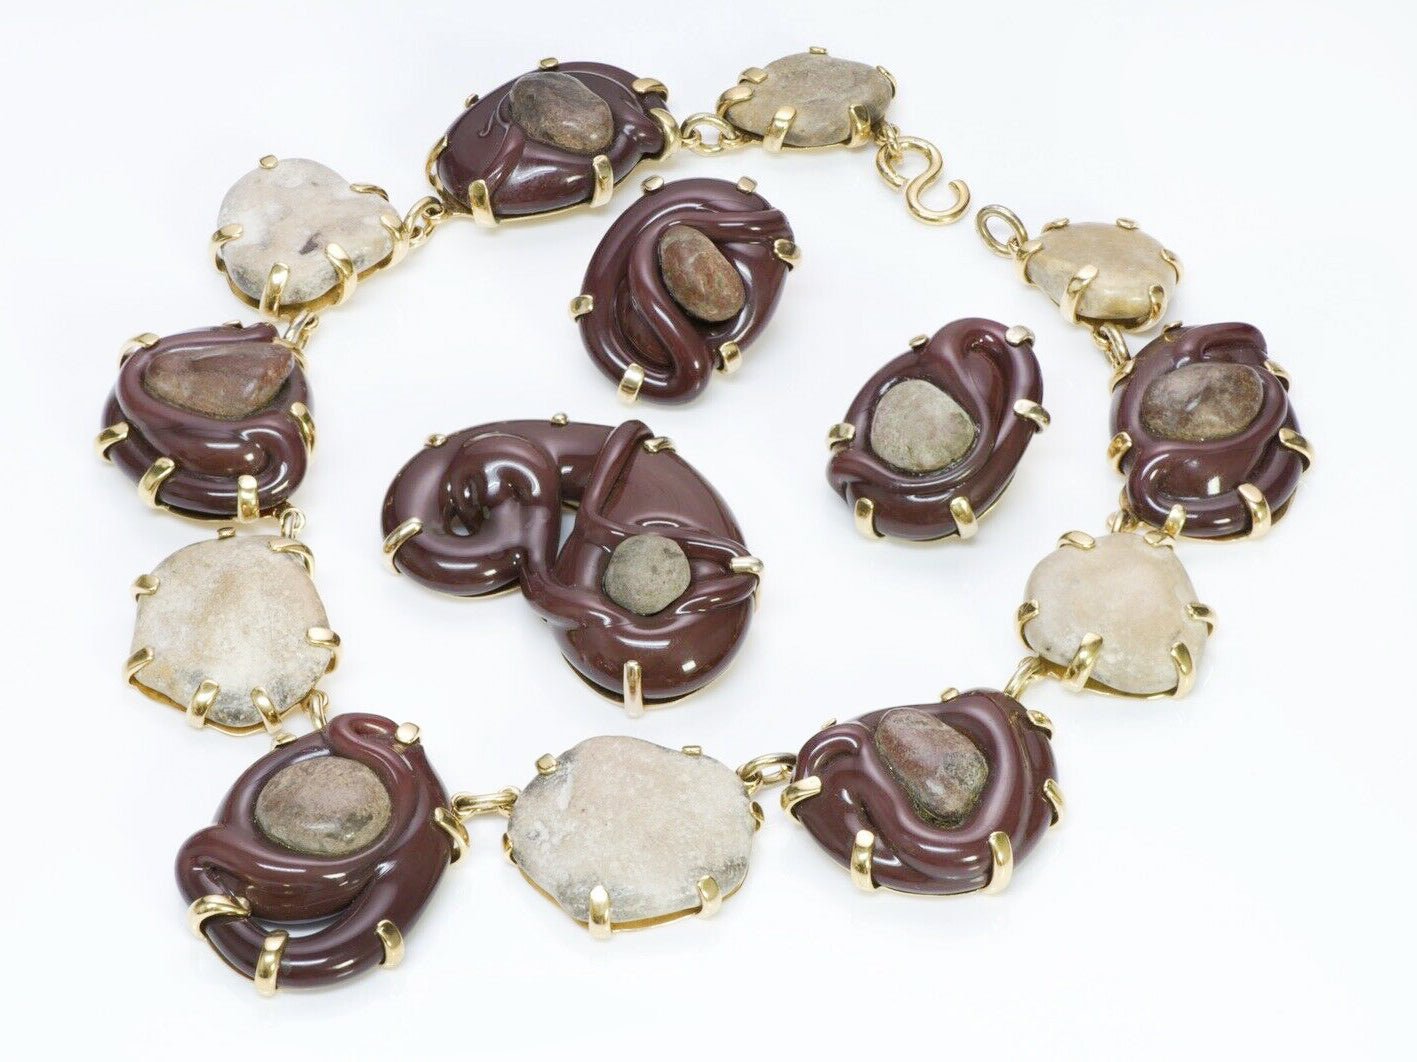 Mariquita Masterson River Stone Necklace Earrings Brooch